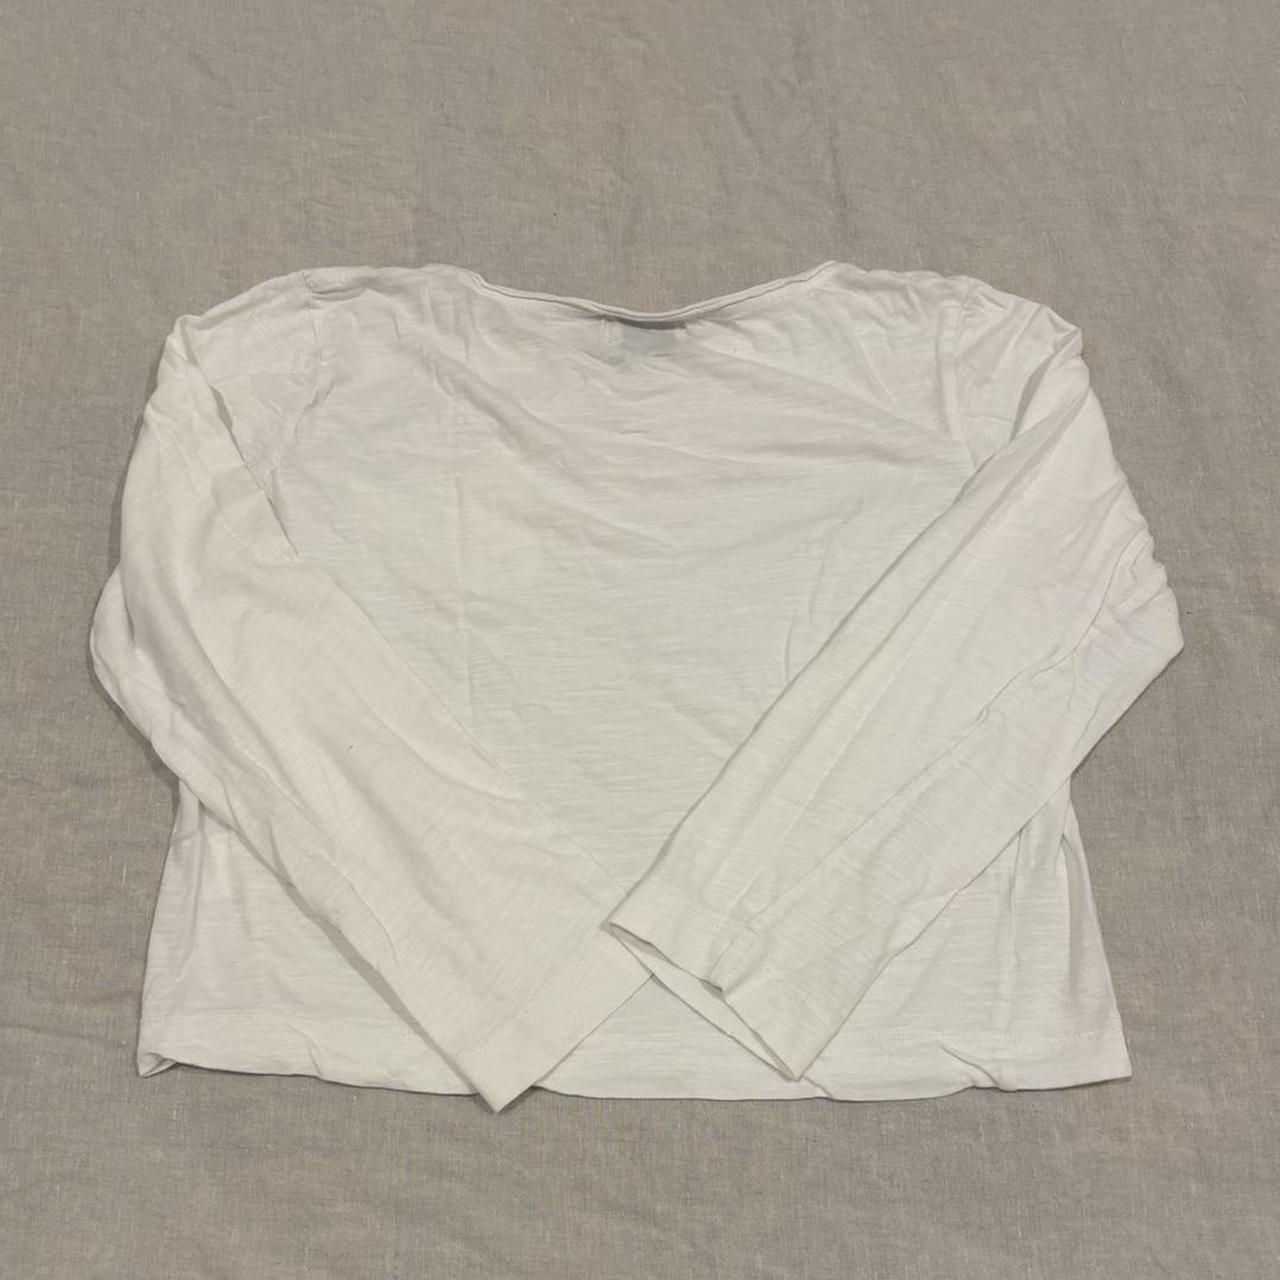 Aje white shirt Pre-loved, still great condition... - Depop